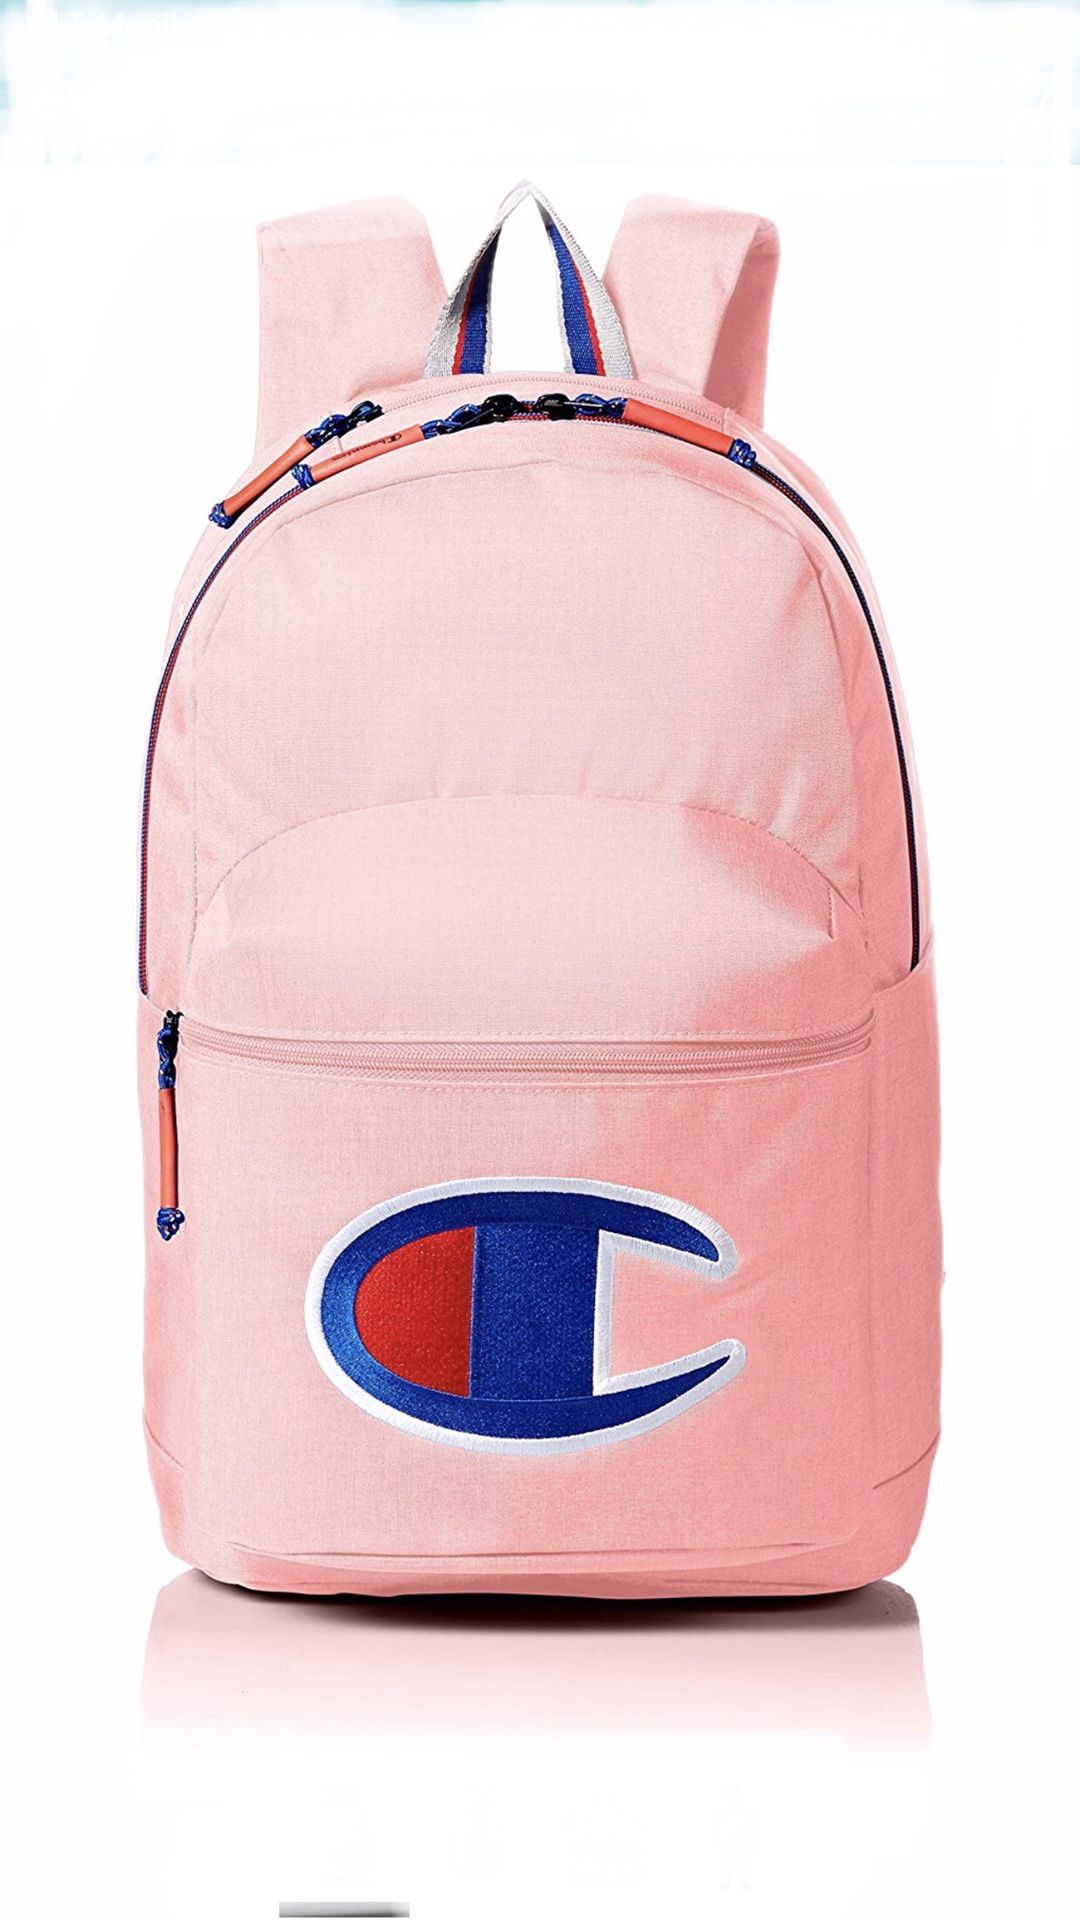 Champions clothing Pink backpack